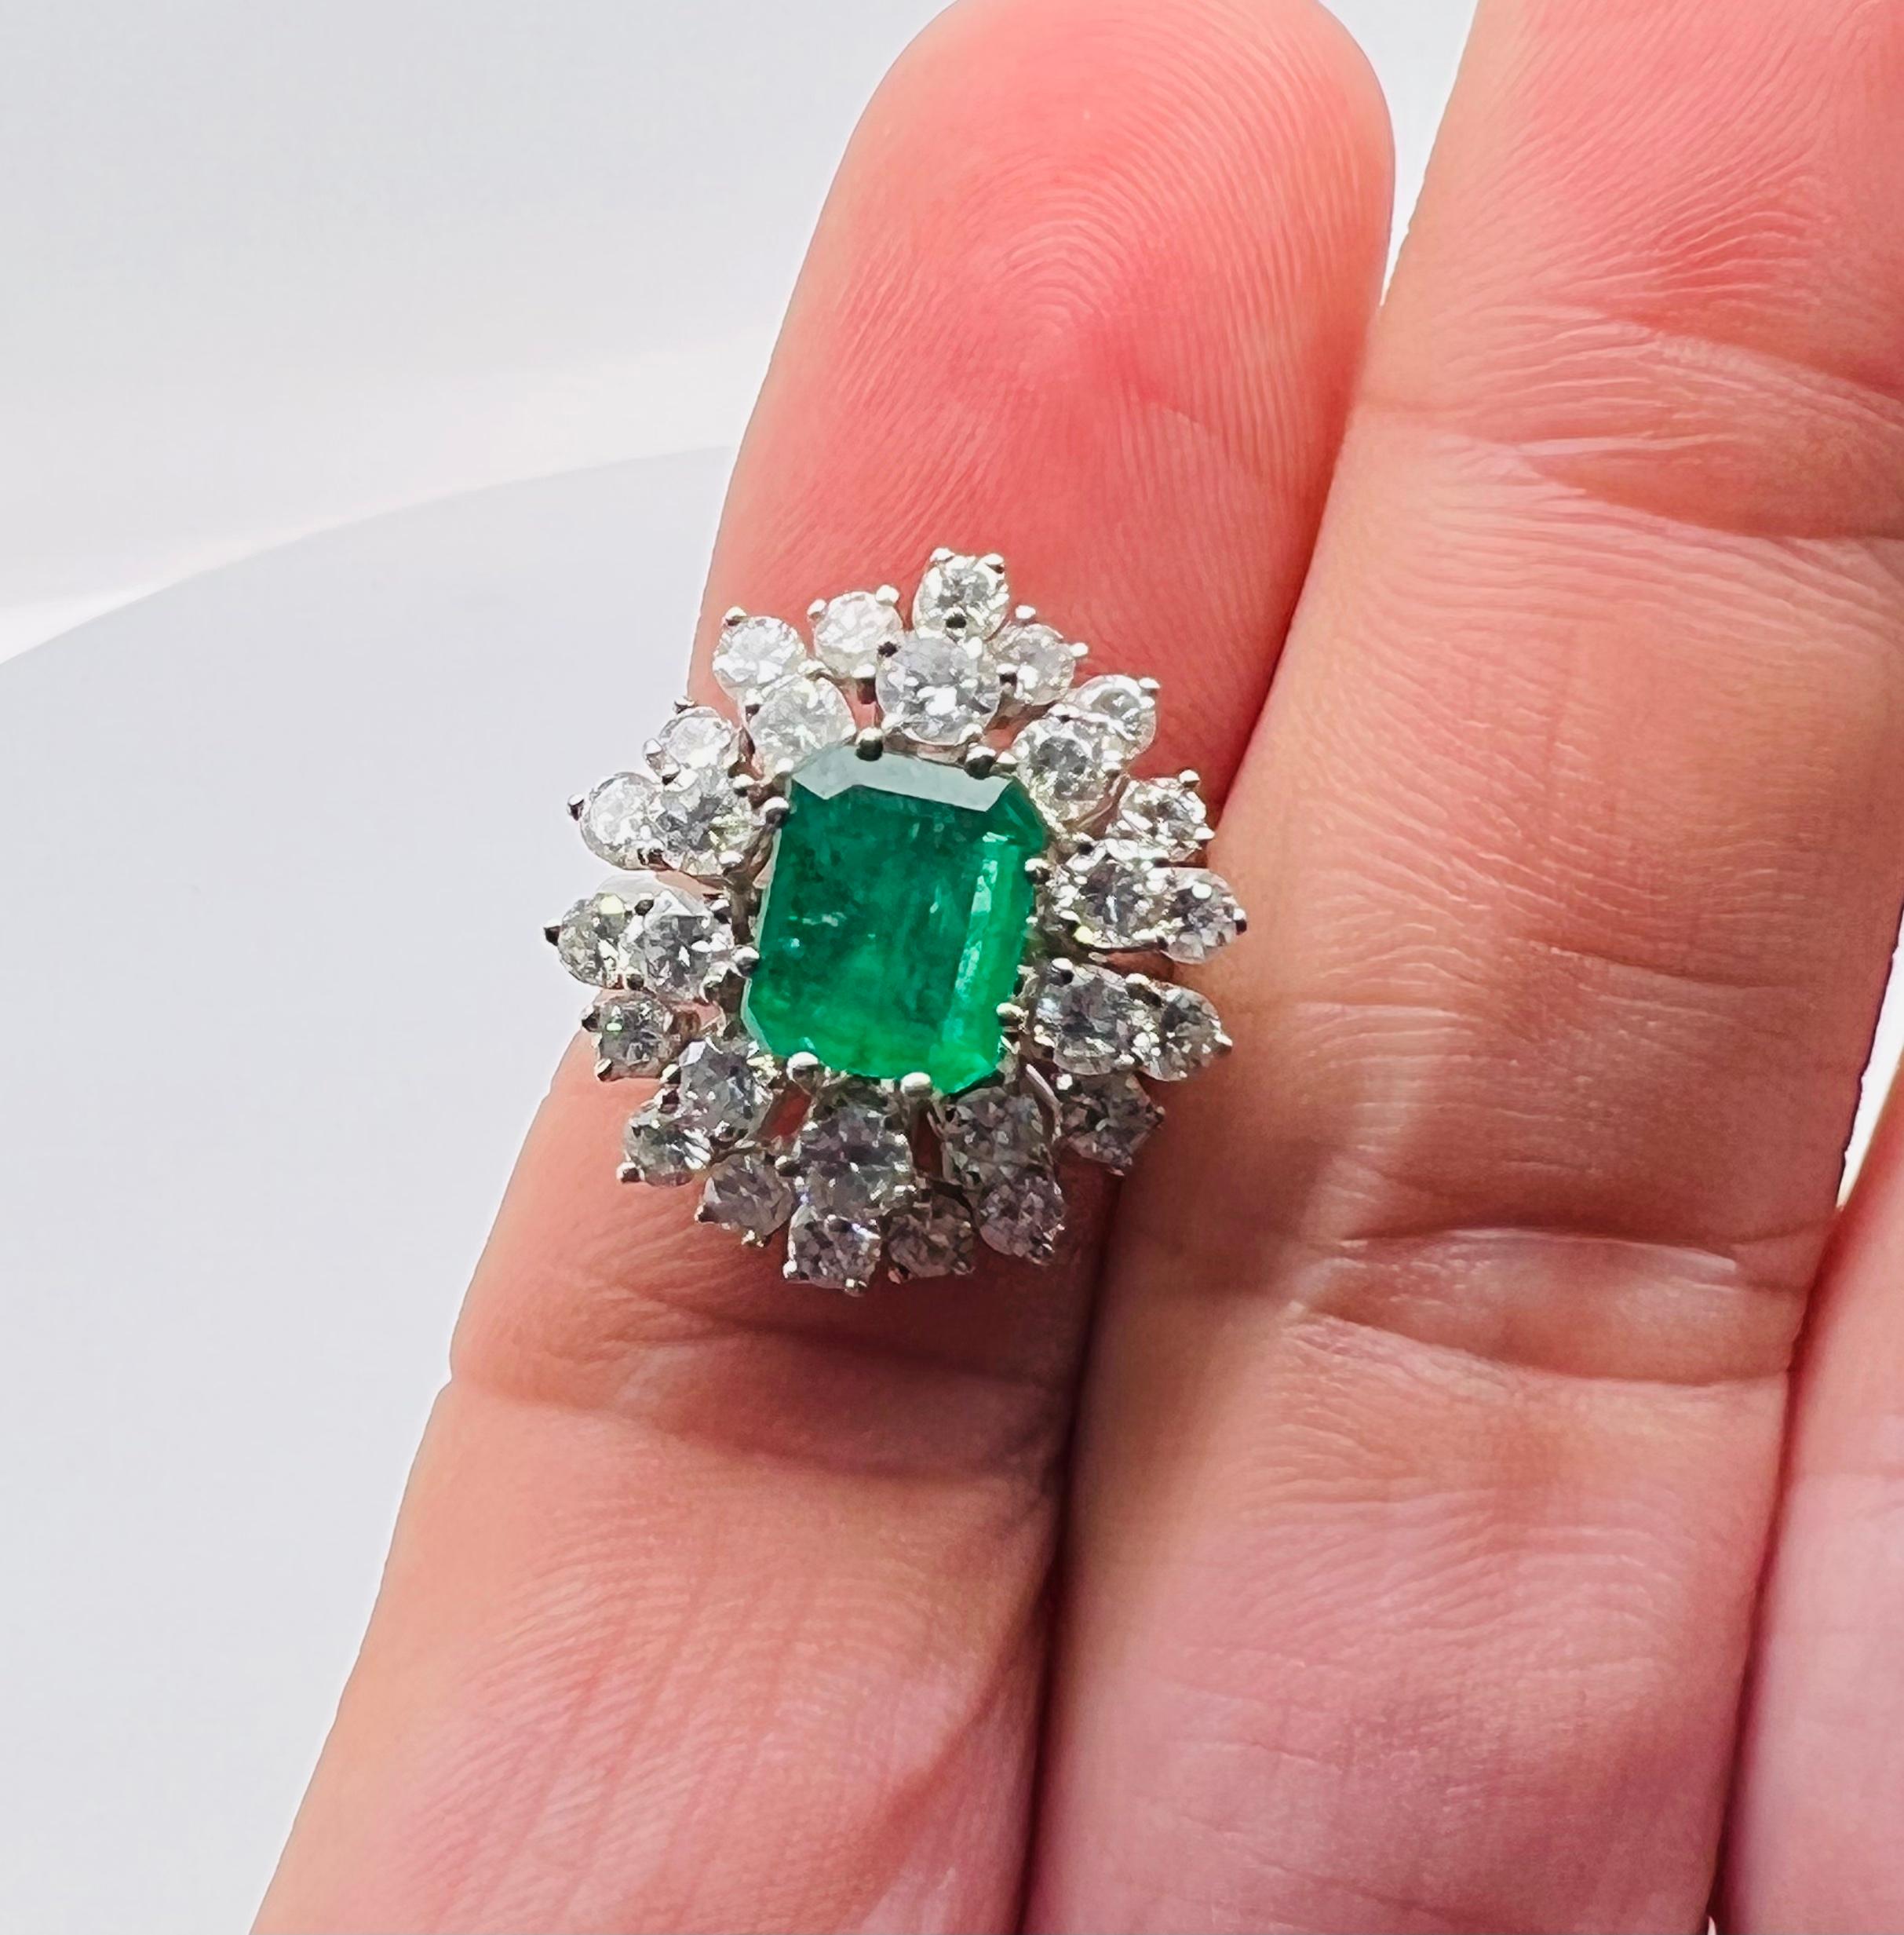 Beautiful ring crafted in 18k white gold. The ring is highlighted with one vivid green color emerald gemstone. The gemstone is of Colombian variety and weighs approximately 3.01 carat. The emerald pops with color and is accented with round brilliant